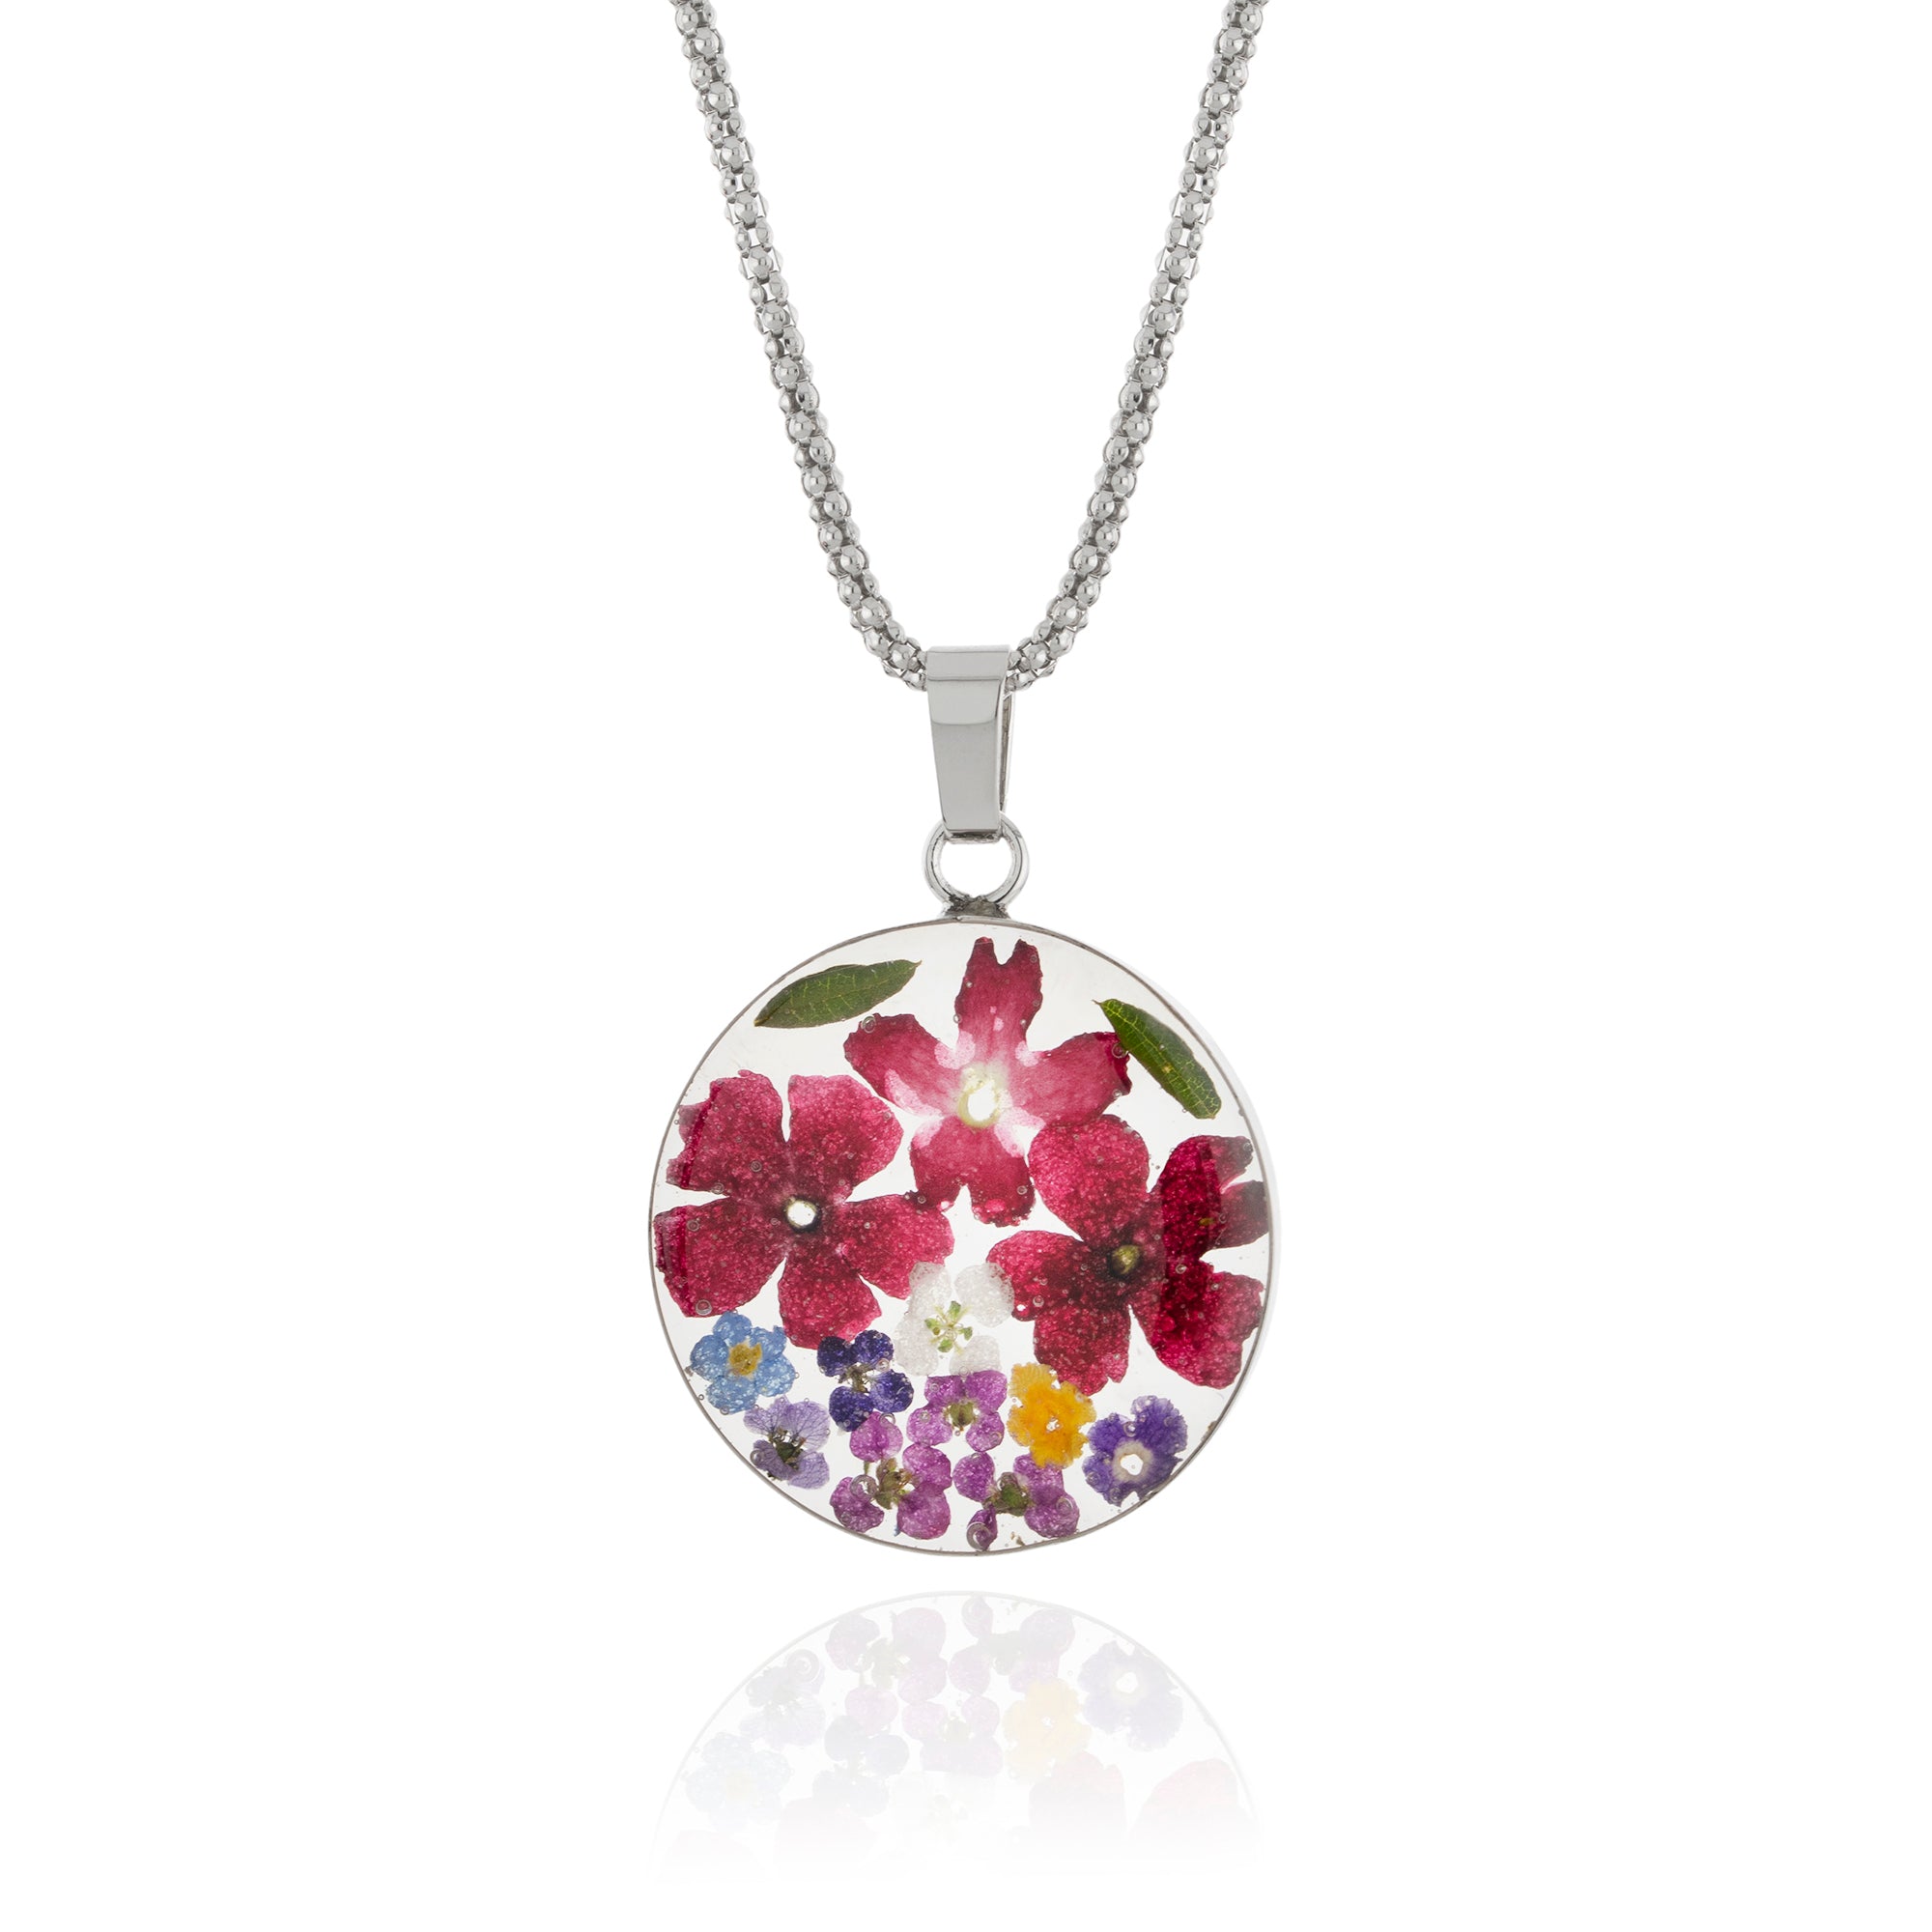 Nature's Bounty Necklace | Everlasting Flowers Jewelry